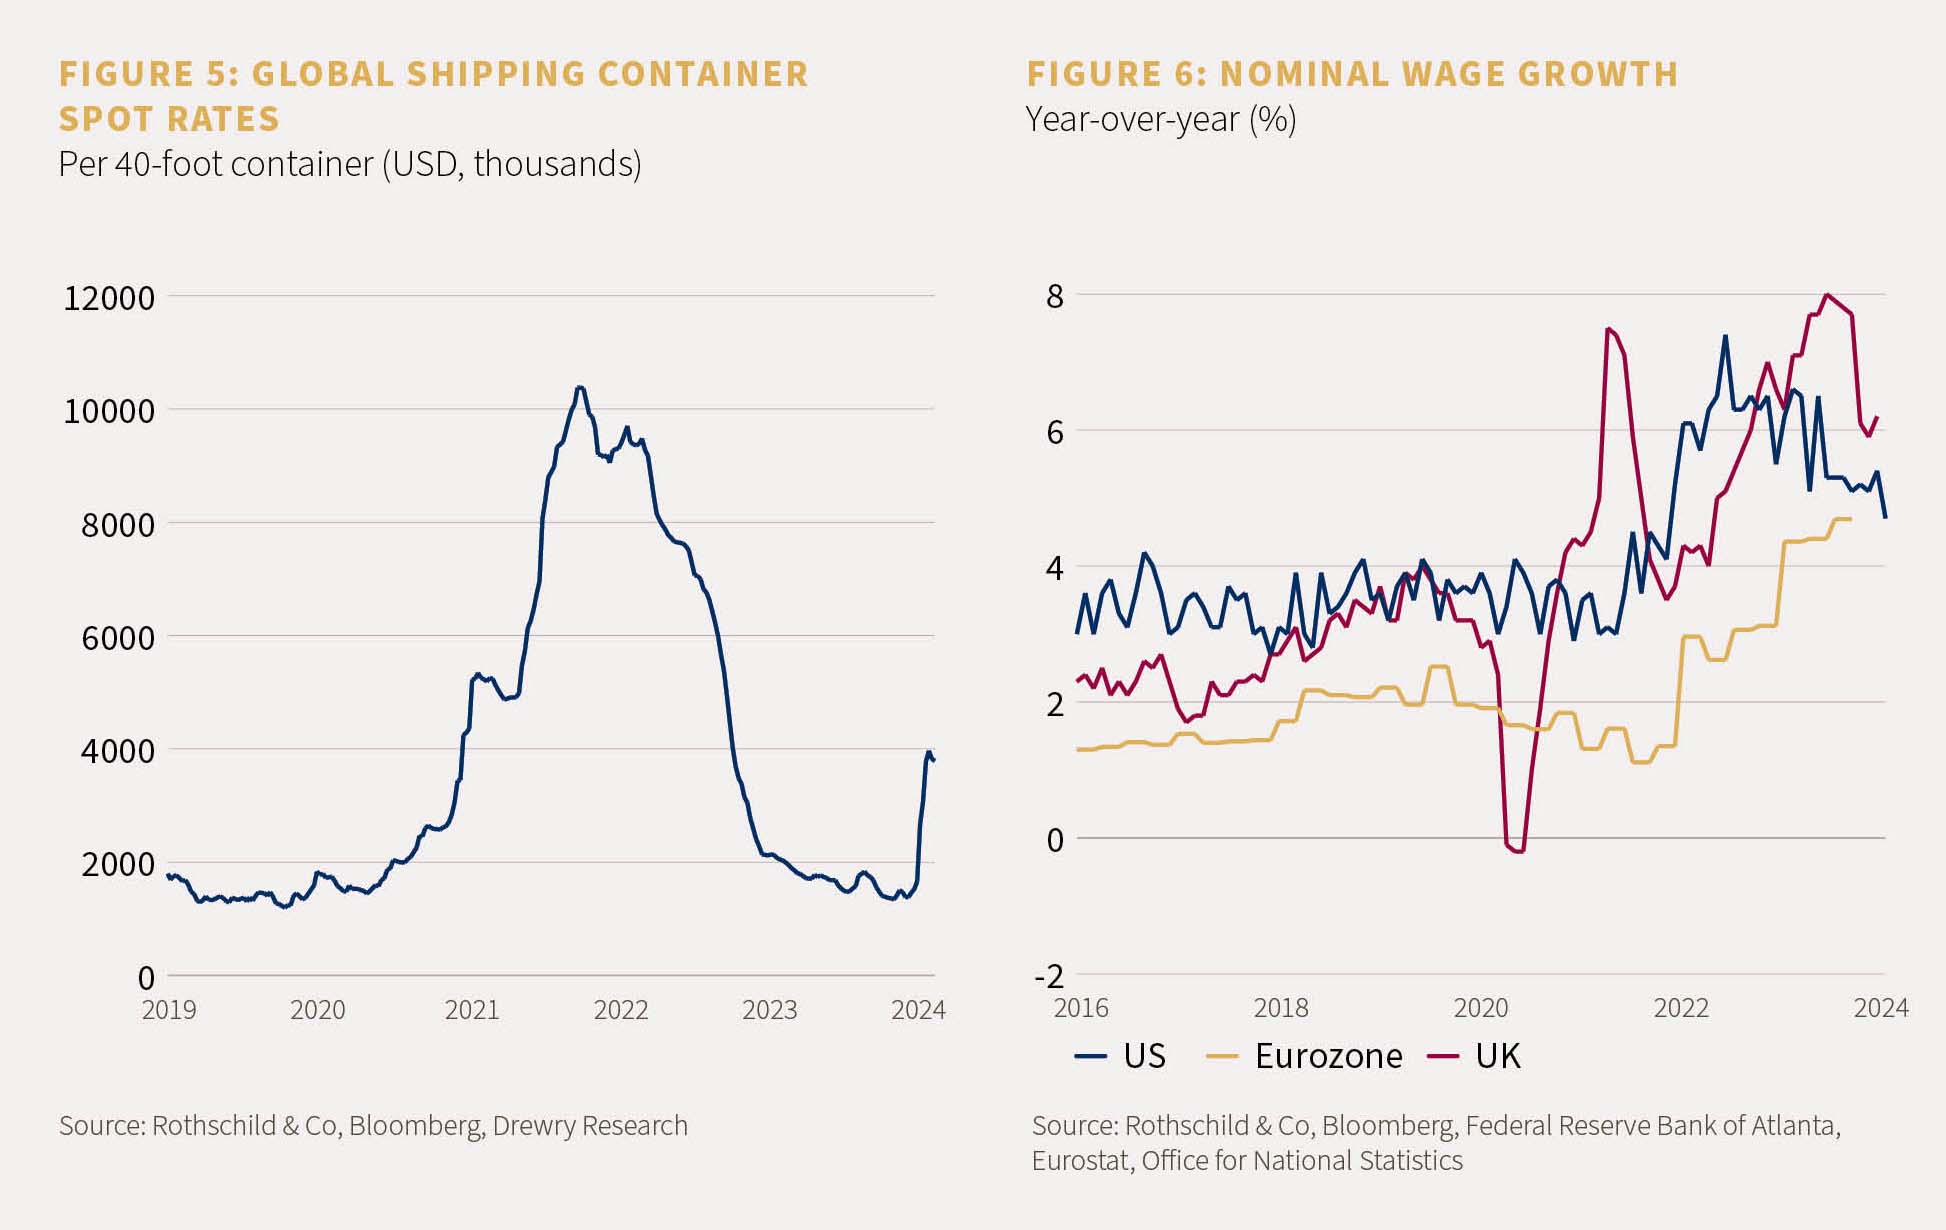 Figure 5 shows the global shipping container spot rates, which peaked in 2022, and figure 6 shows nominal wage growth, year on year.